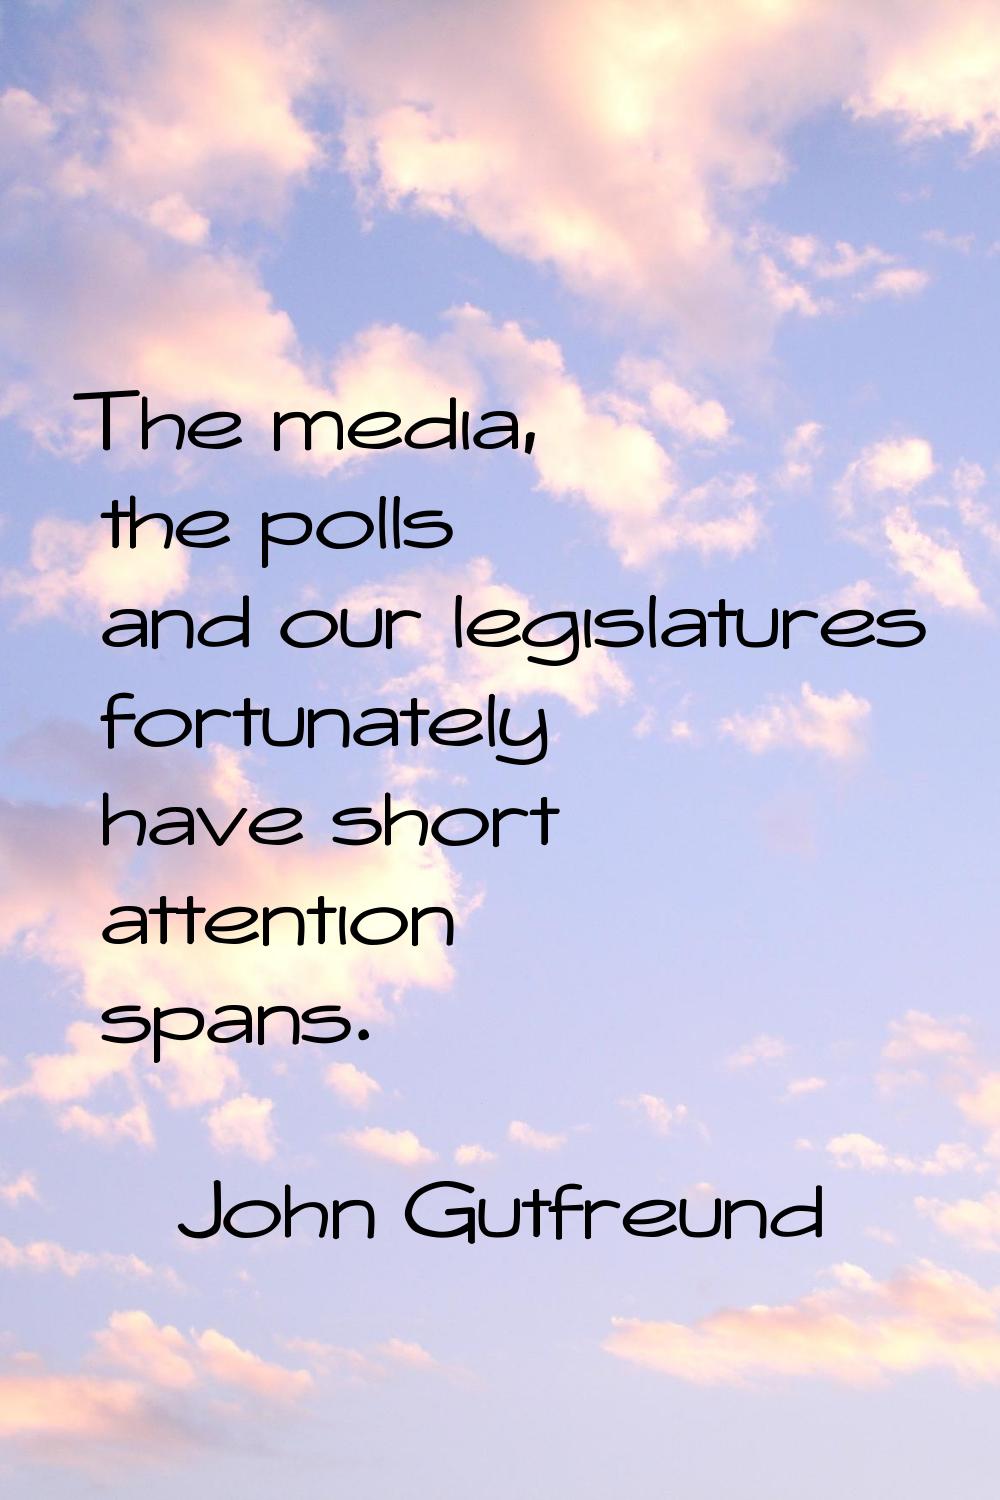 The media, the polls and our legislatures fortunately have short attention spans.